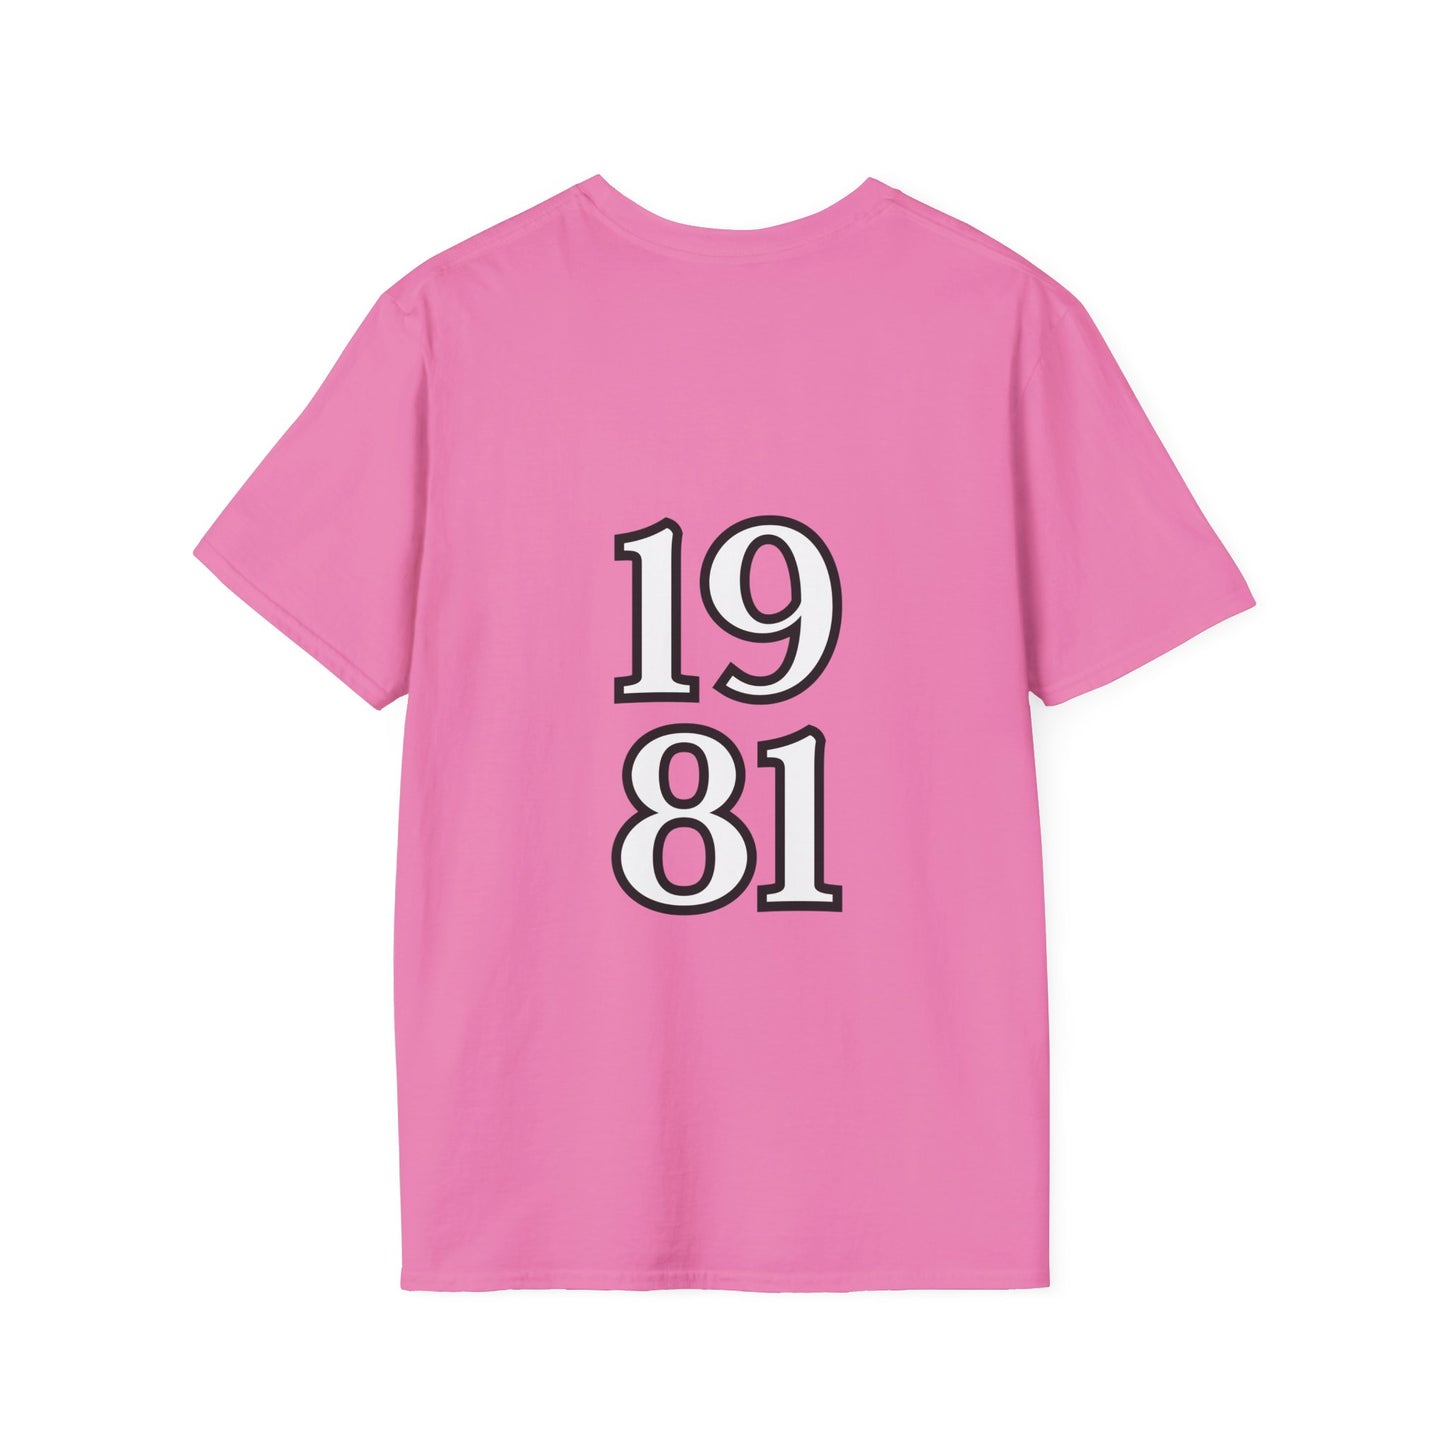 1981 x Years Collection - tee